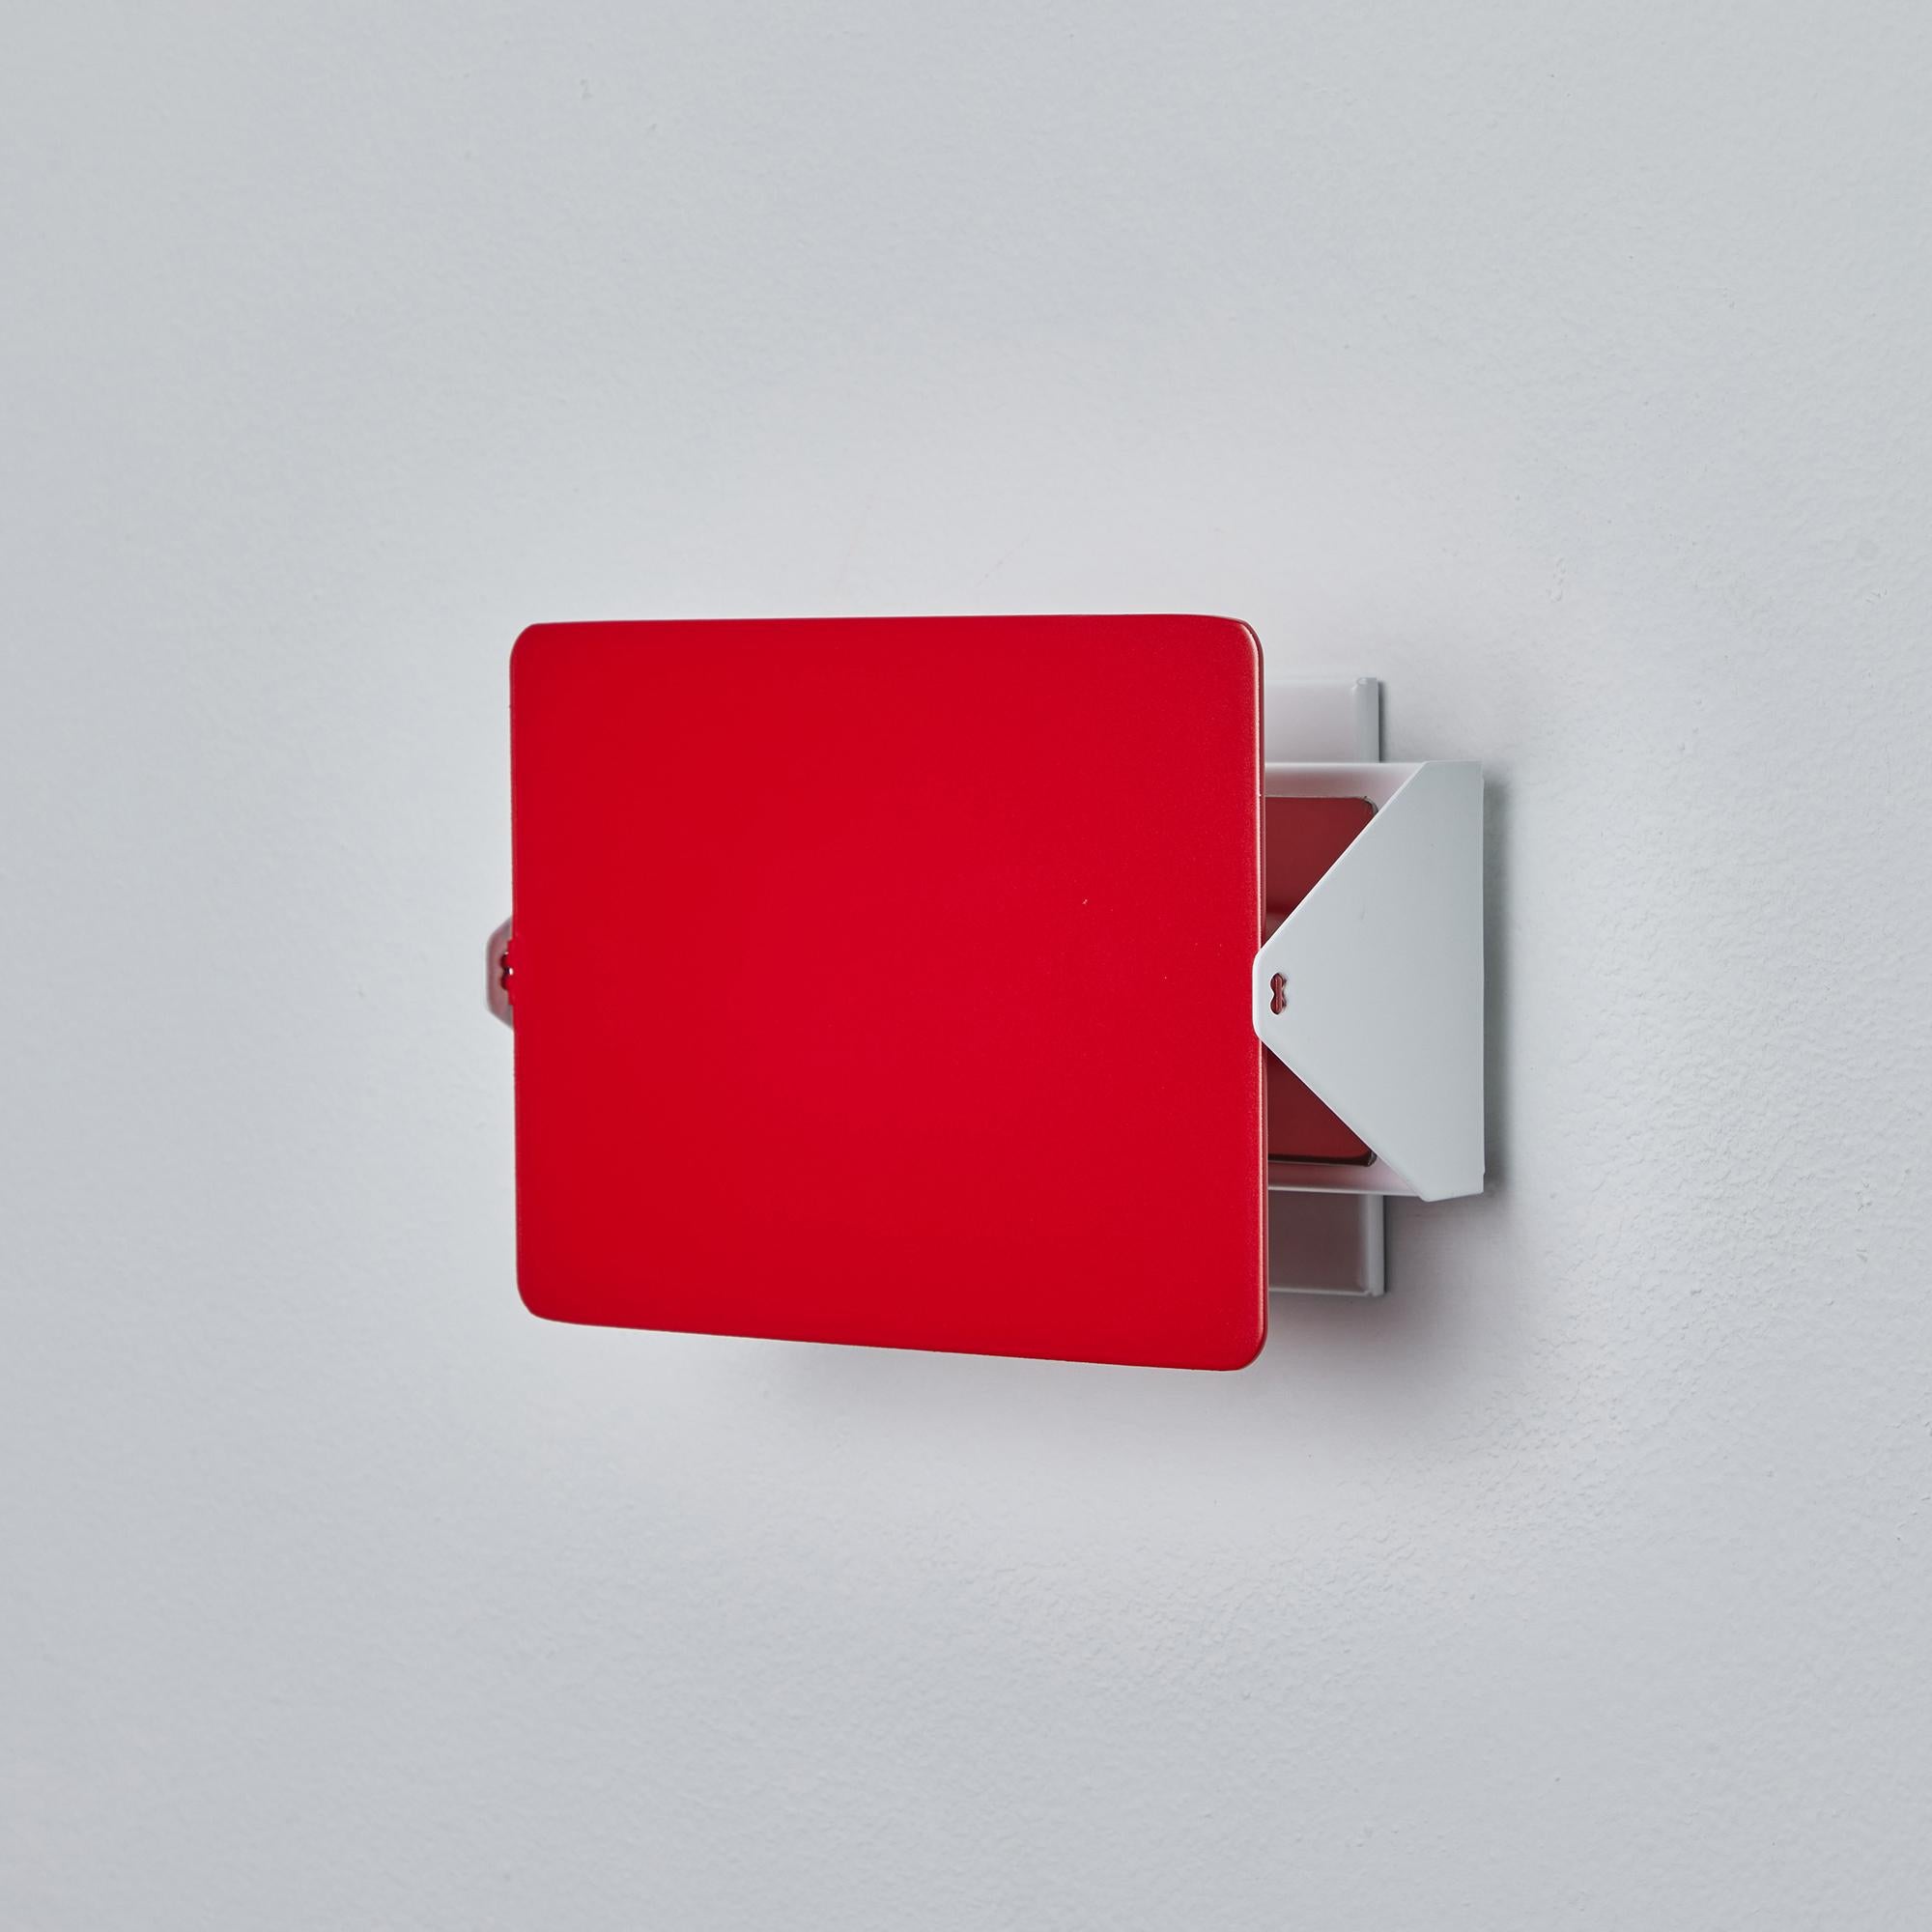 Mid-Century Modern Charlotte Perriand 'Applique à Volet Pivotant' Wall Light in Red for Nemo For Sale